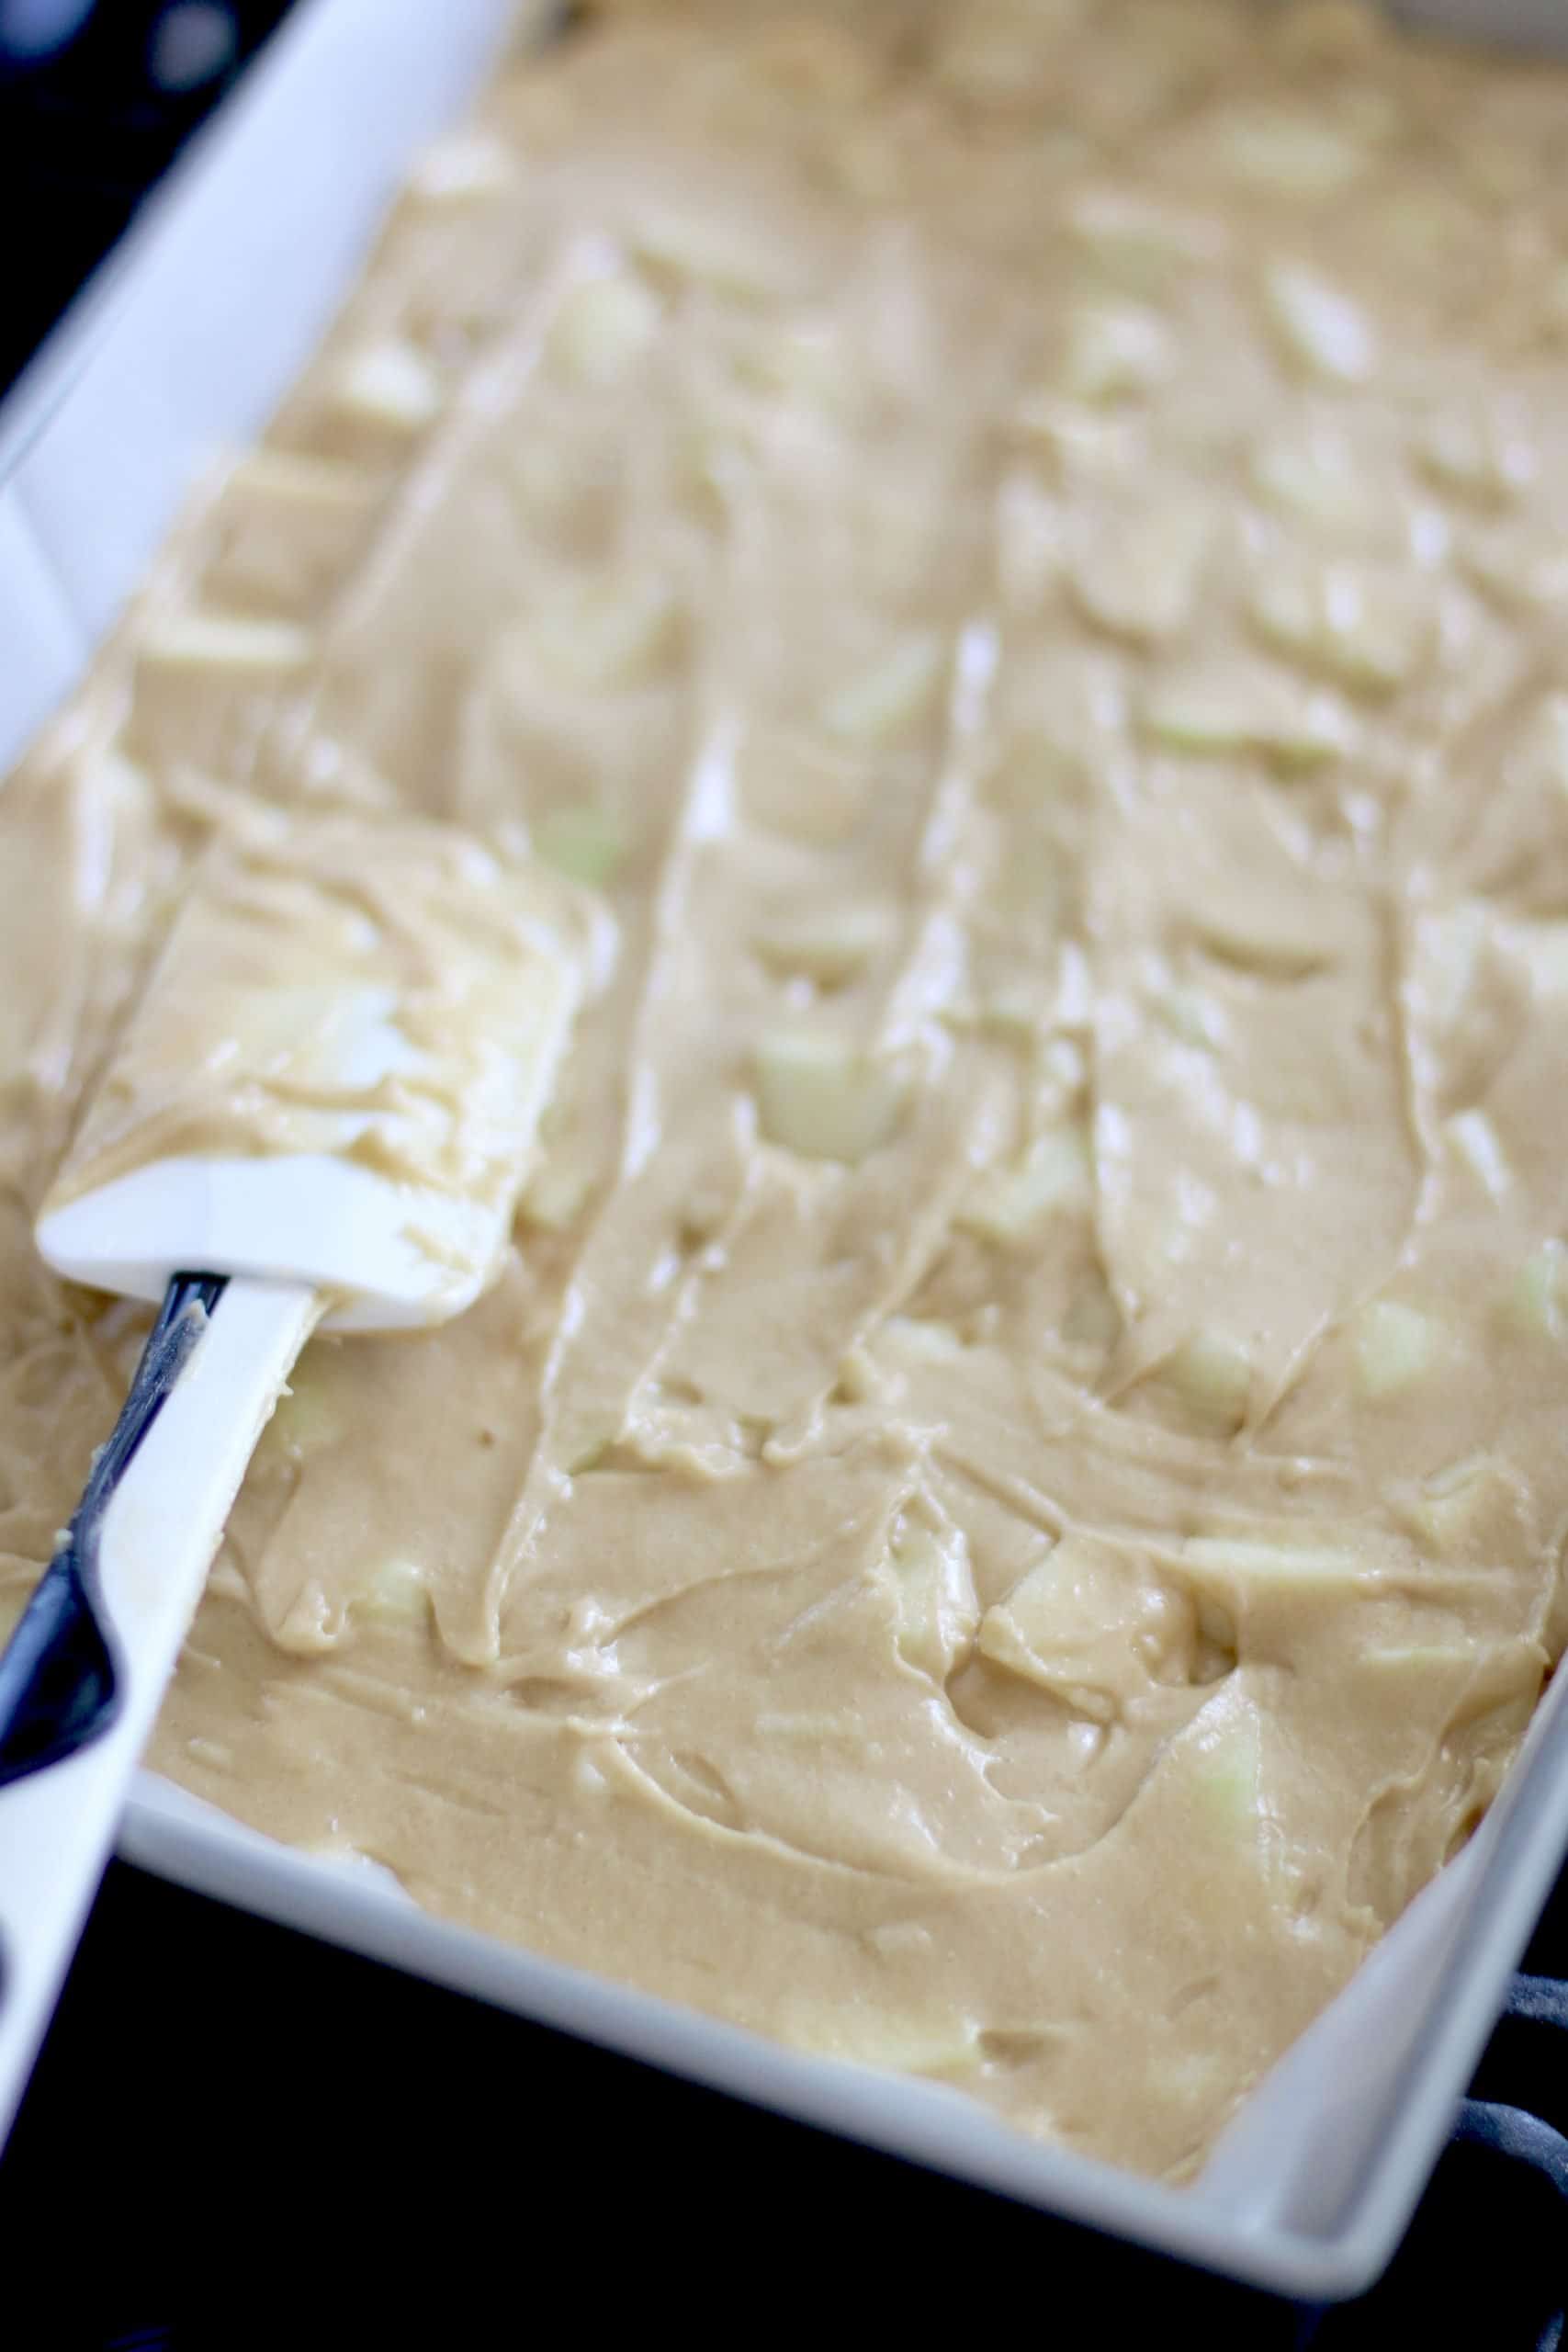 apple blondie batter spread into rectangle baking pan spread by a spatula.